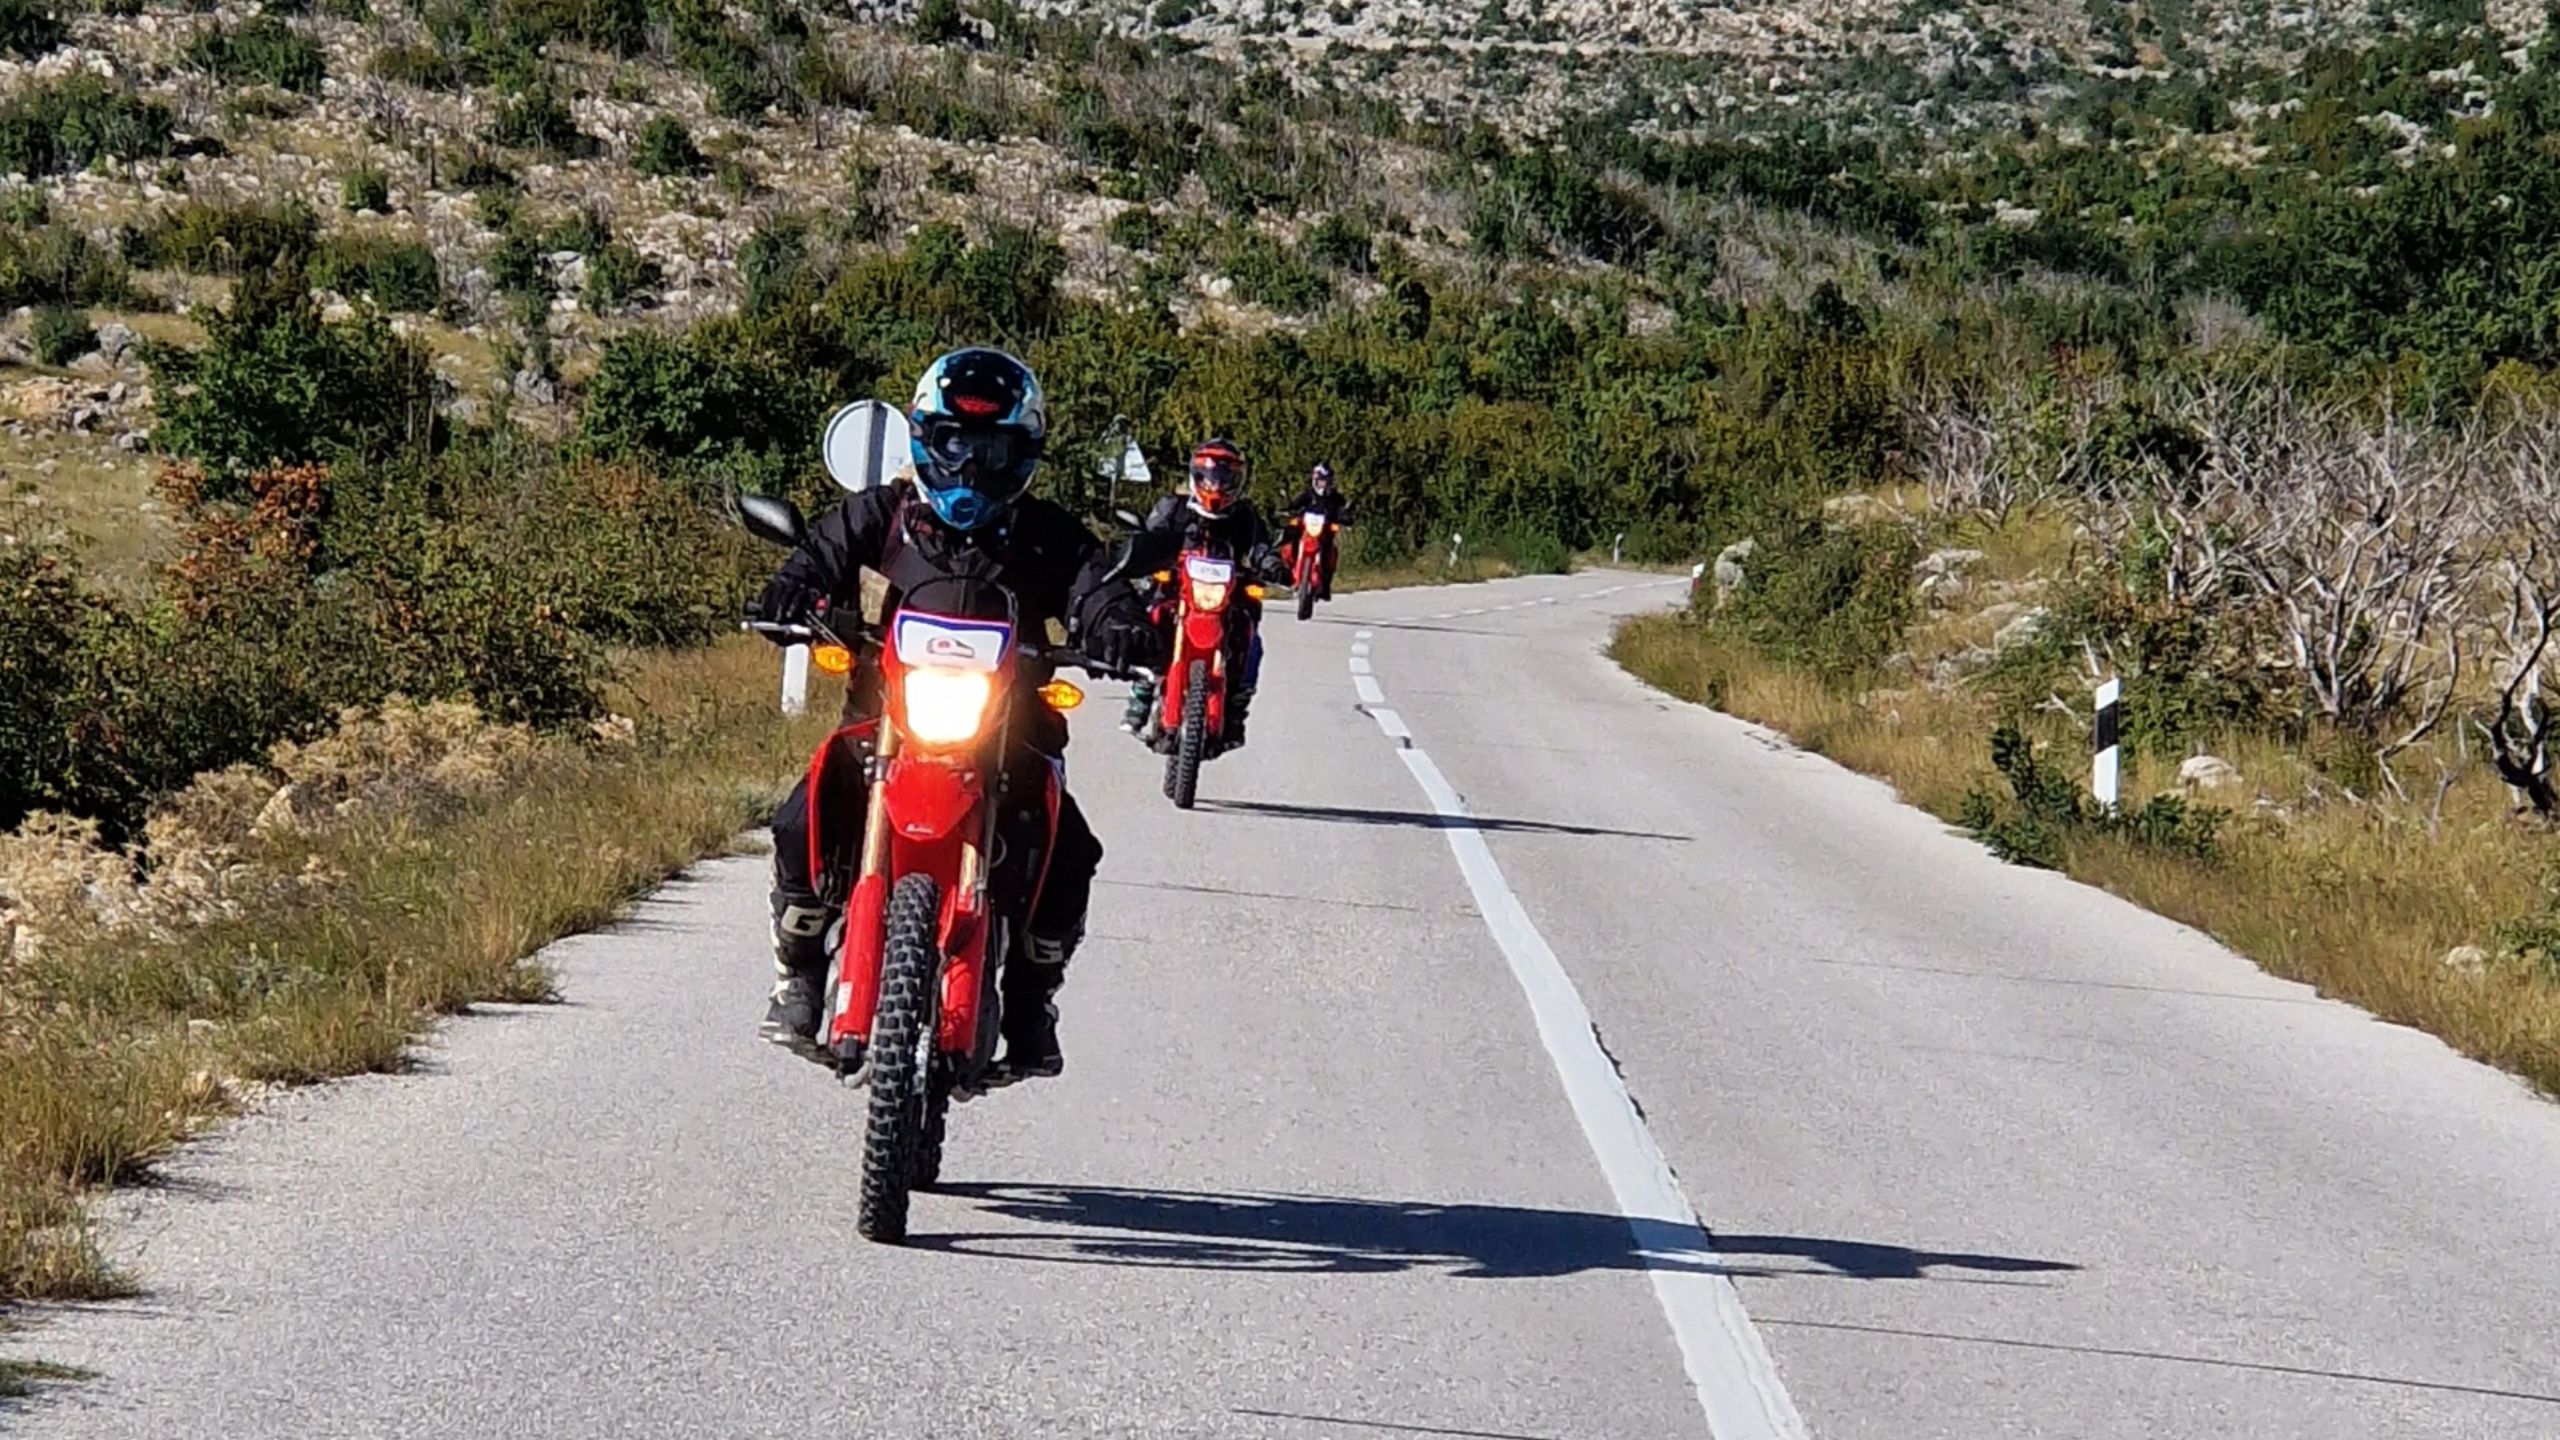 Funmoto ADVentures sightseeing 4 day only womens motorcycle tour in Croatia the road ride